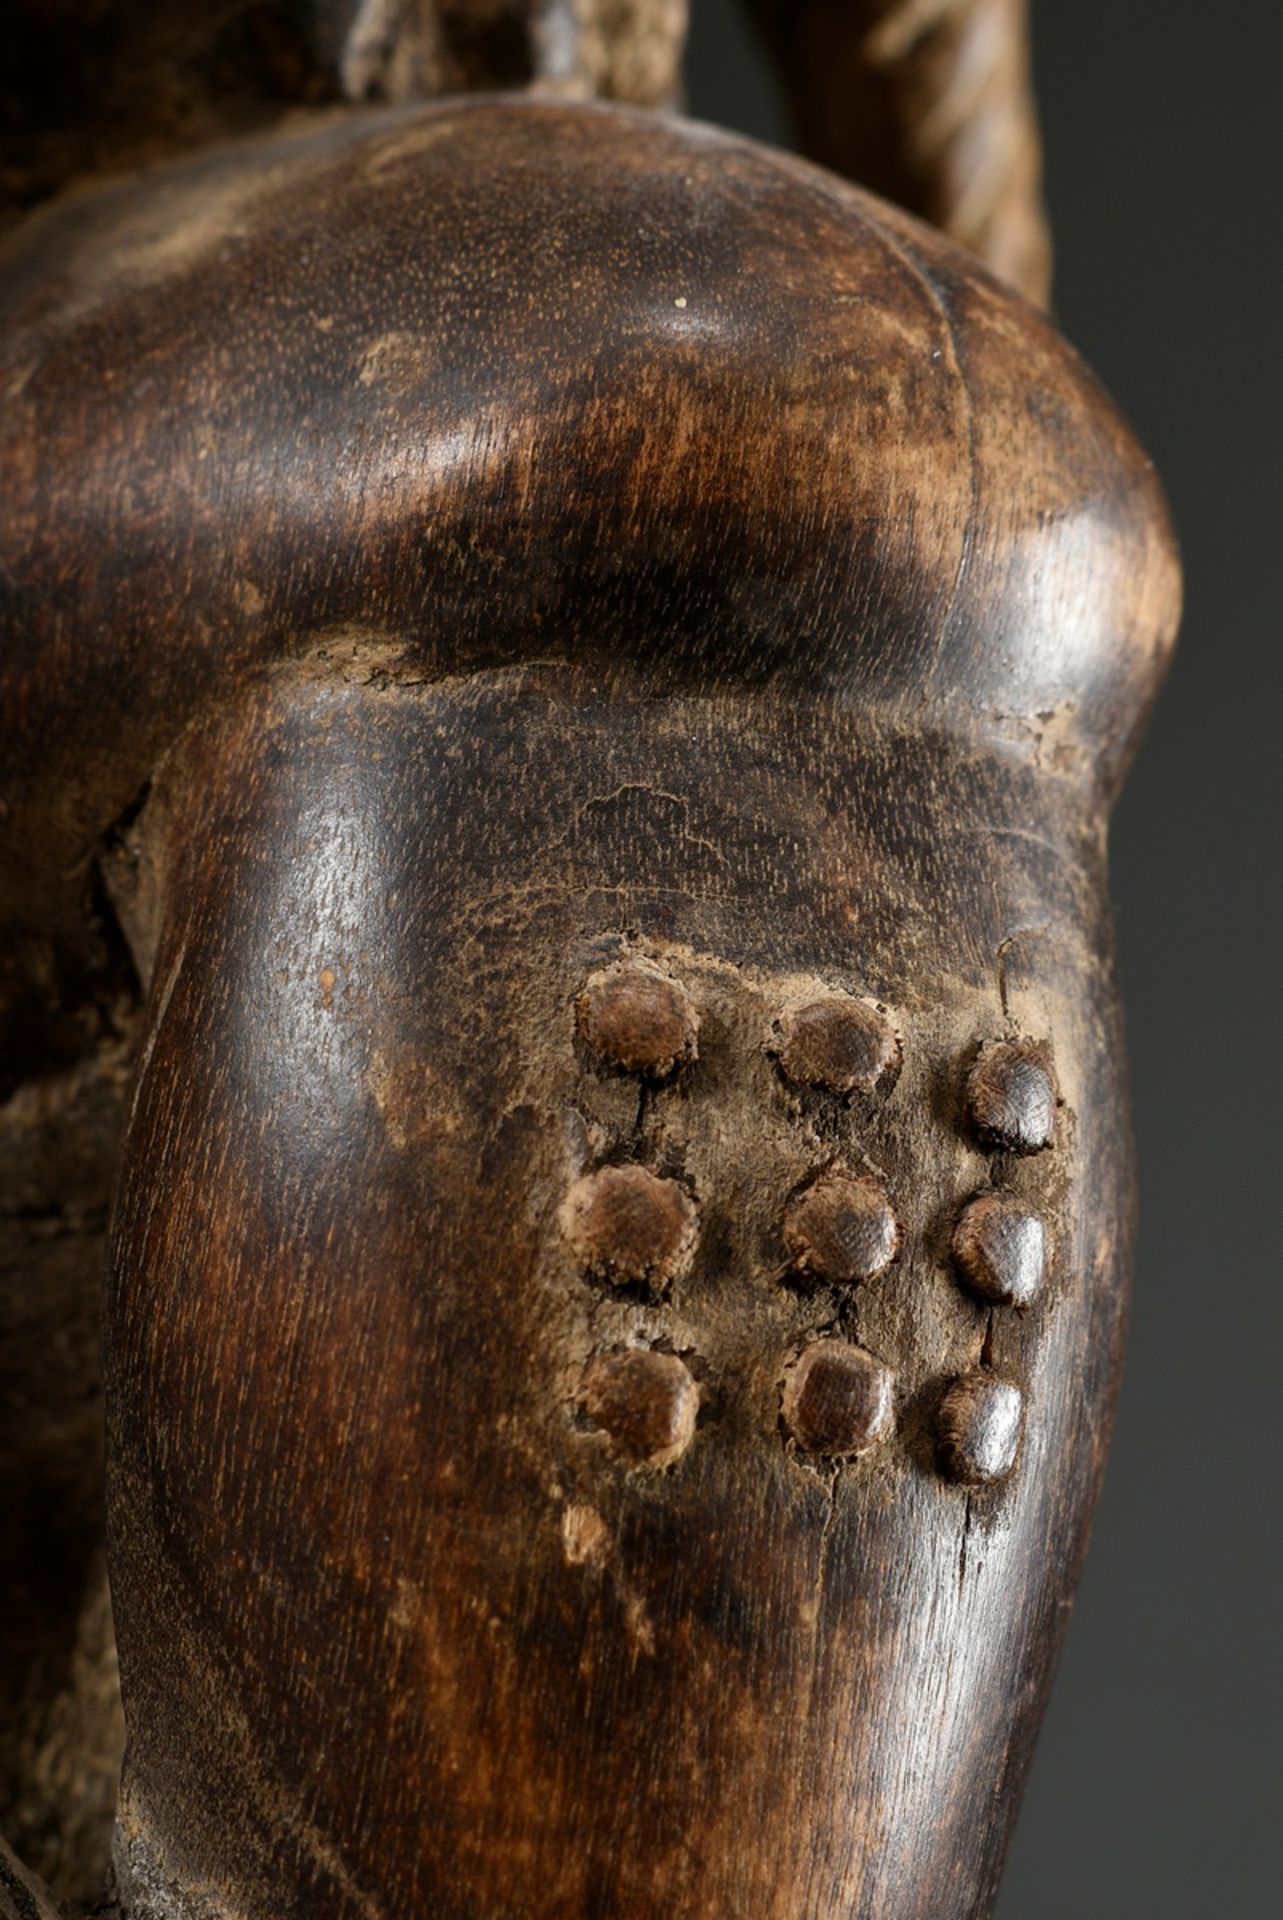 Male African ancestor figure "Blolo bian" with scarifications, carved wood with remains of old pati - Image 4 of 9